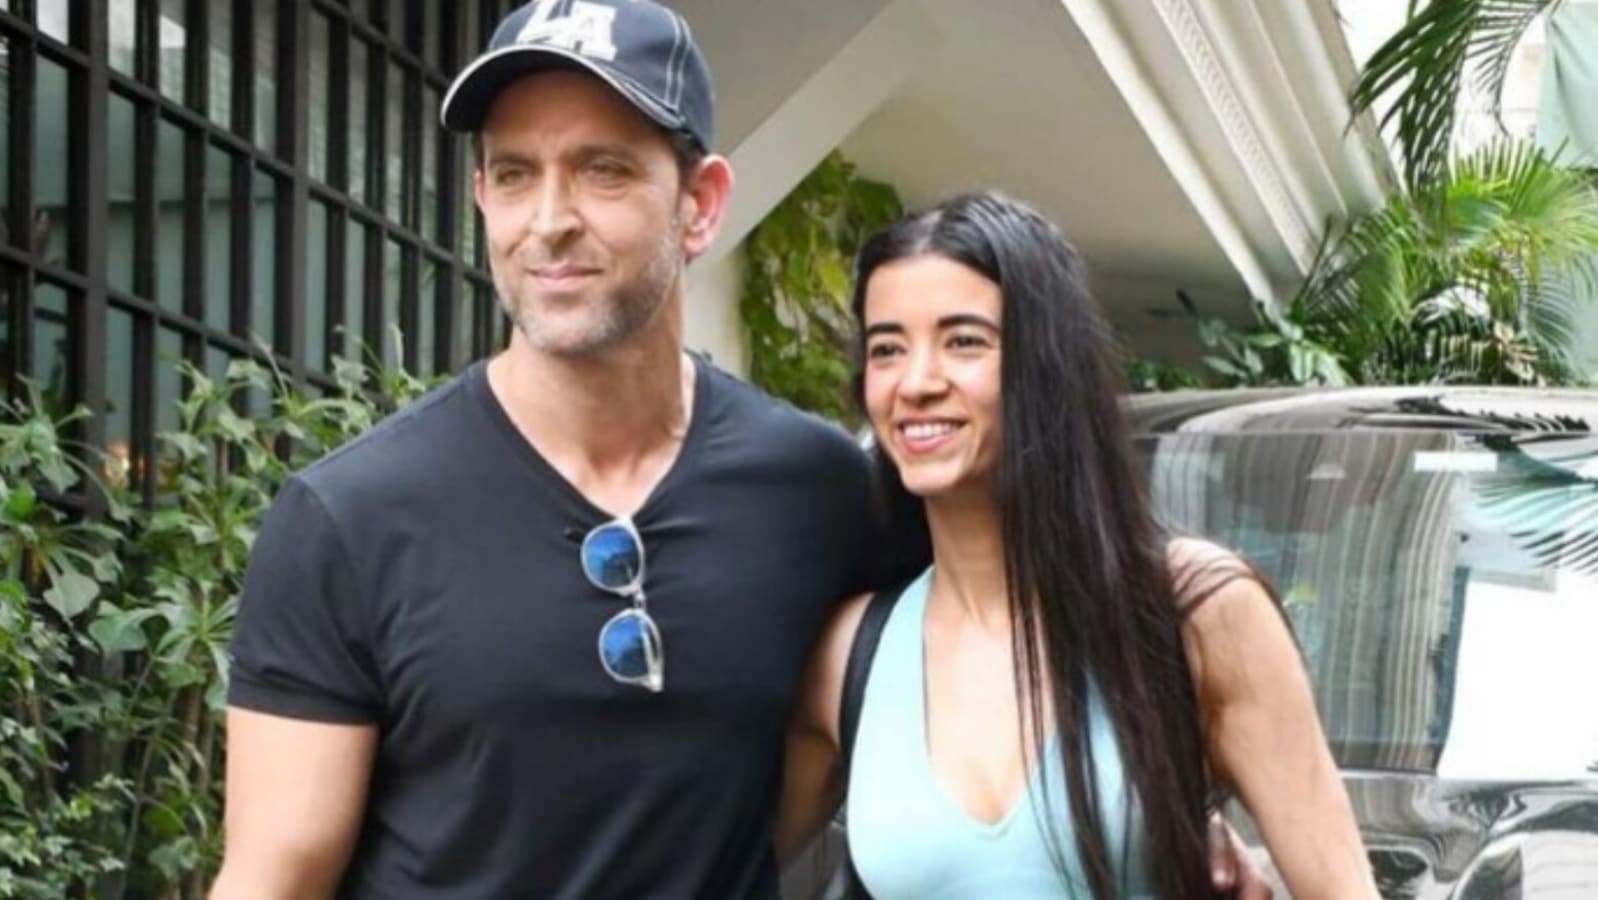 Hrithik Roshan Sex Videos - Hrithik Roshan calls Saba Azad for pics after being spotted together in  Mumbai | Bollywood - Hindustan Times